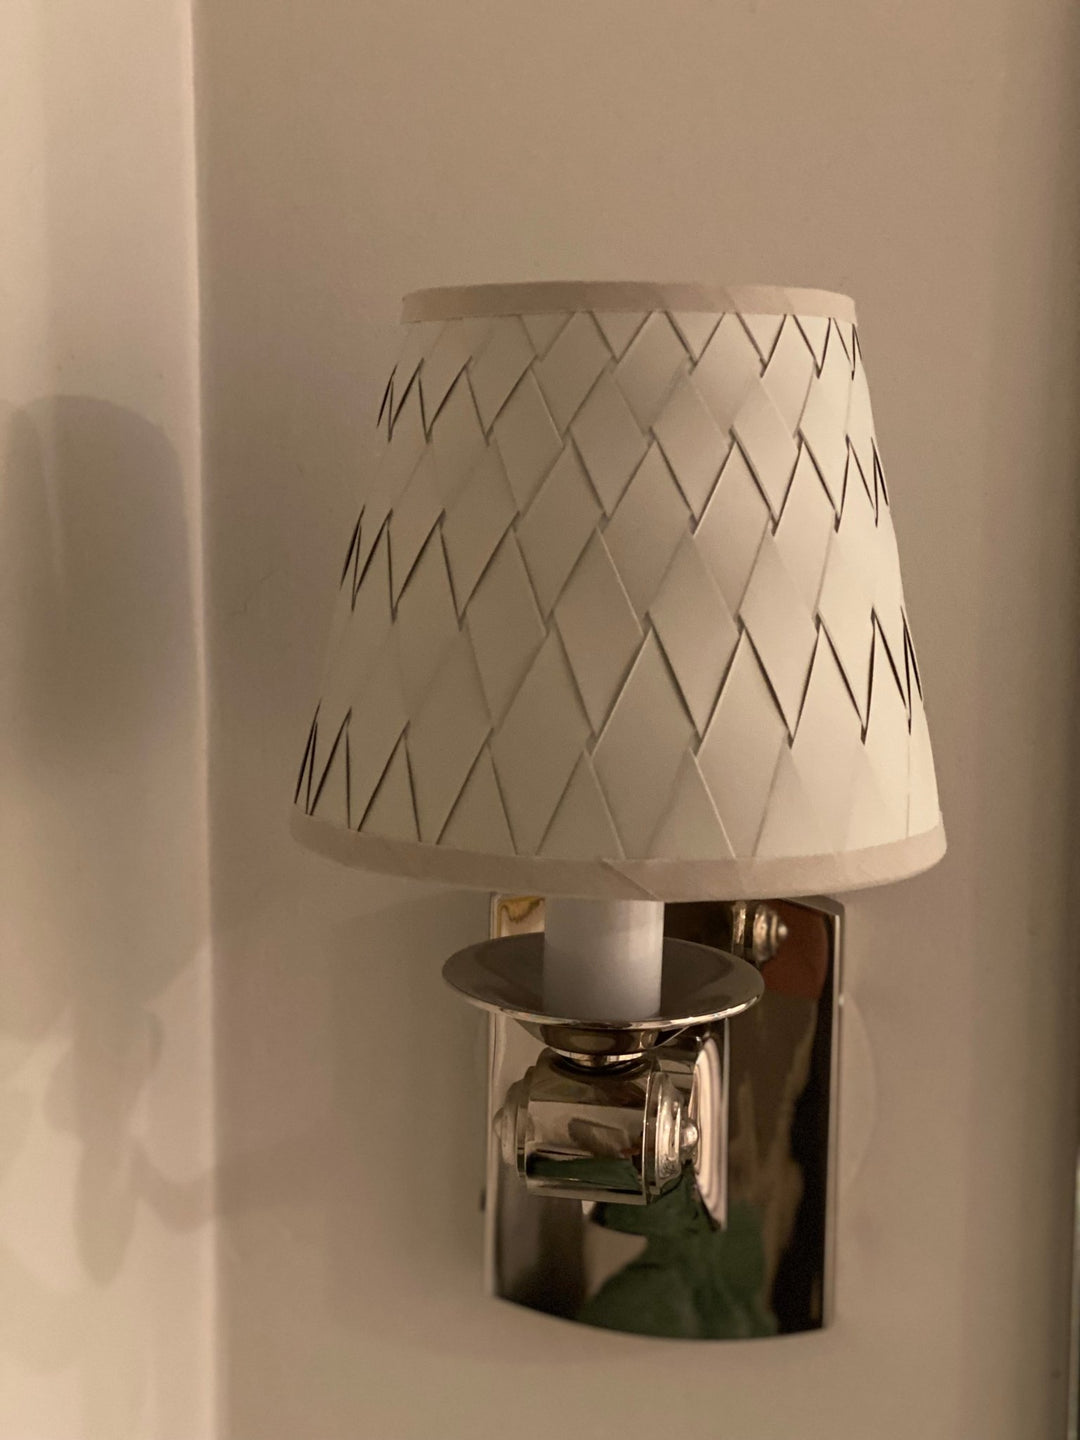 Silver Sage Woven Paper Chandelier Lamp Shade - Available in two sizes - Lux Lamp Shades